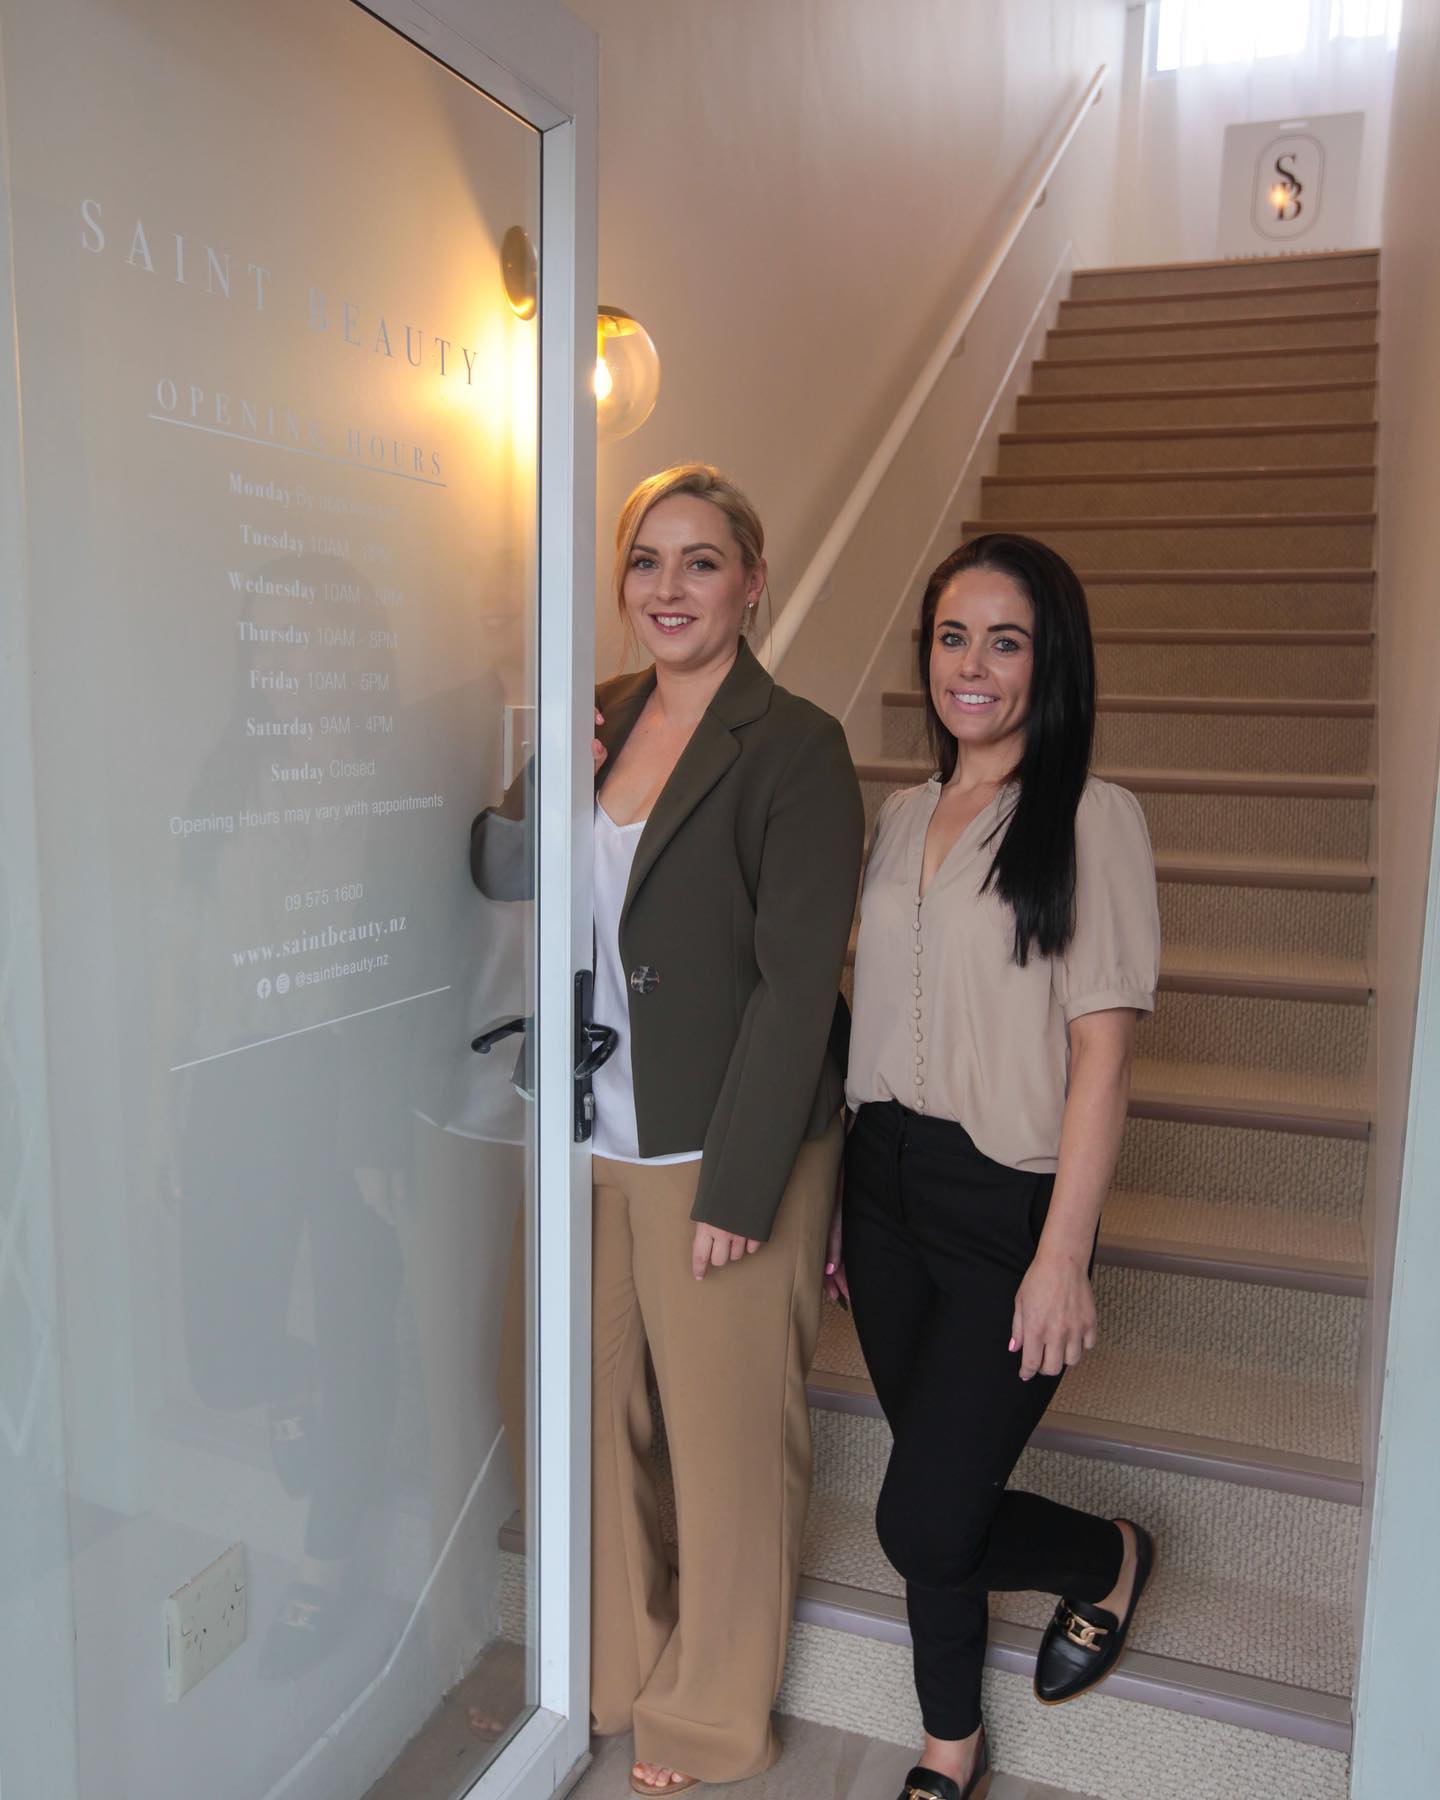 Meet the brains behind the new Saint Heliers skin and beauty salon raking in rave reviews